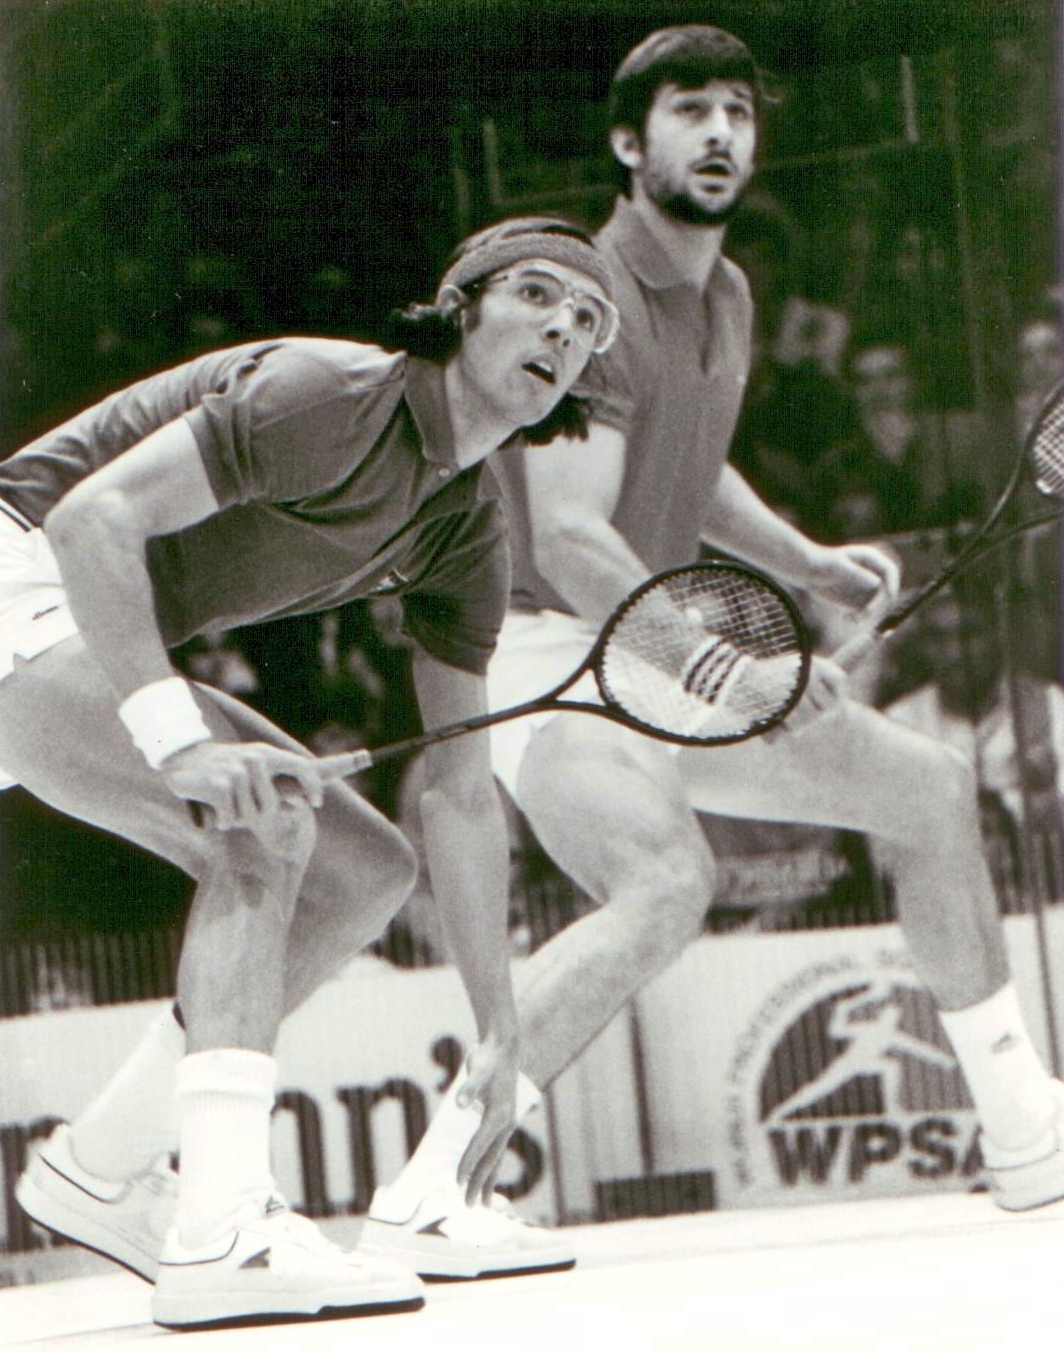 Ned Edwards (with beard) was Talbott’s foil on the WPSA tour and for many years was the only player to beat him in a final.